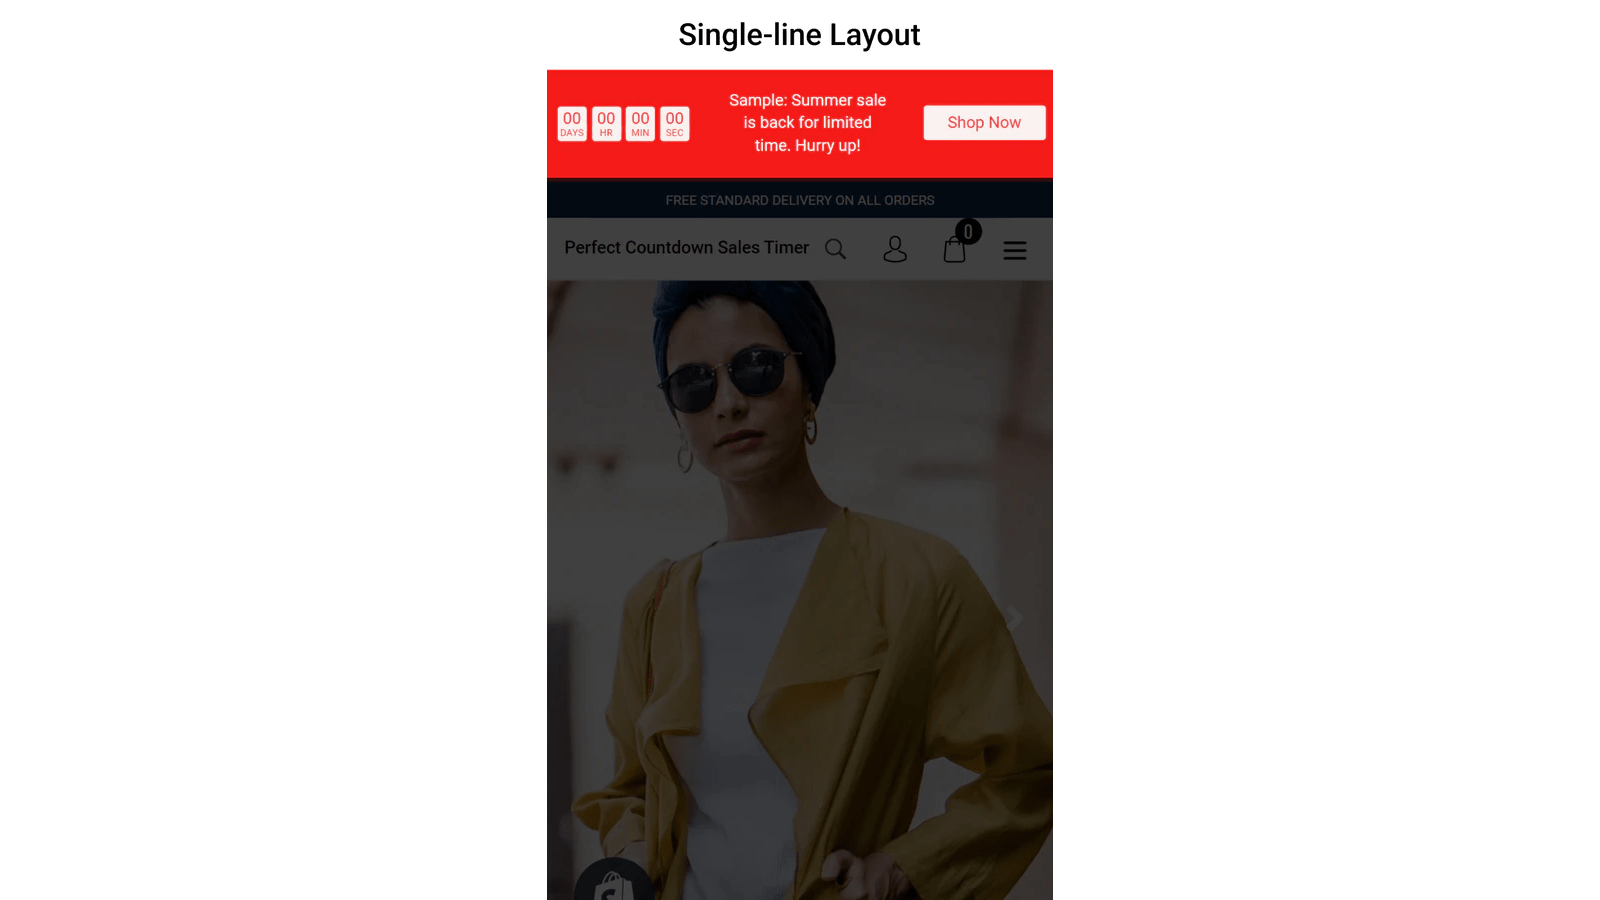 Perfect Countdown Sales Timer : Single Line Layout